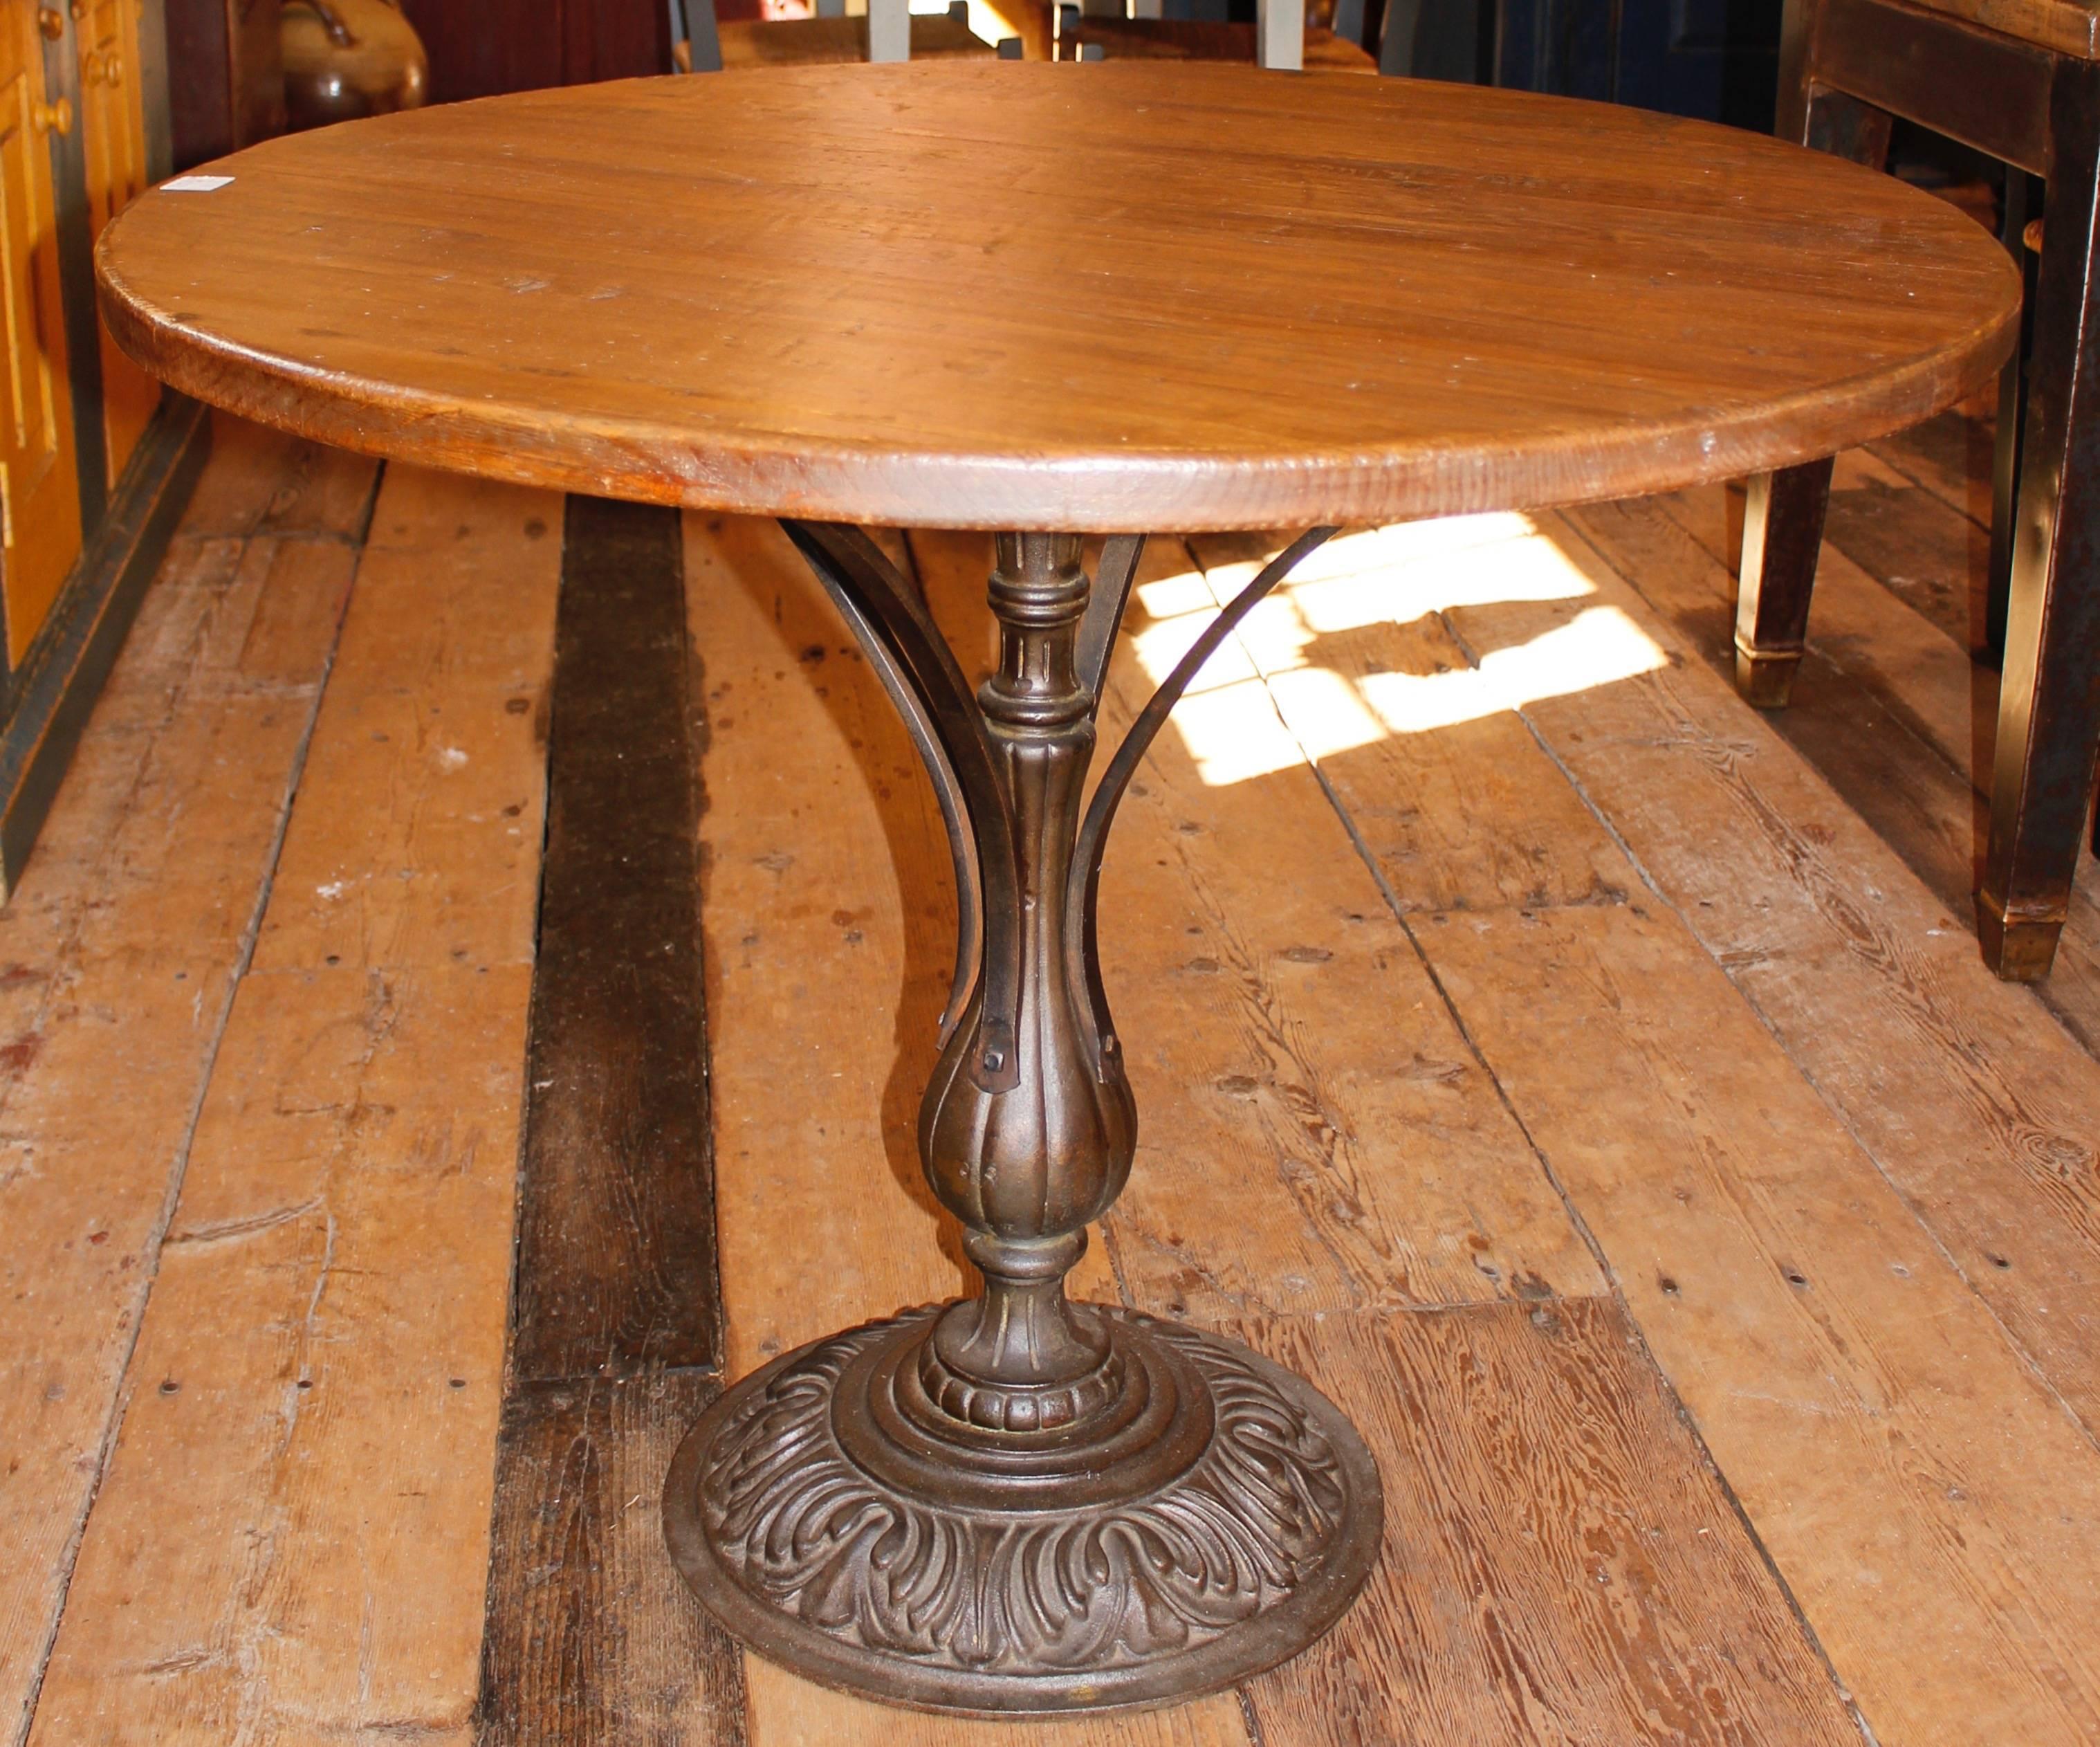 Bistro table with a decorative metal base.